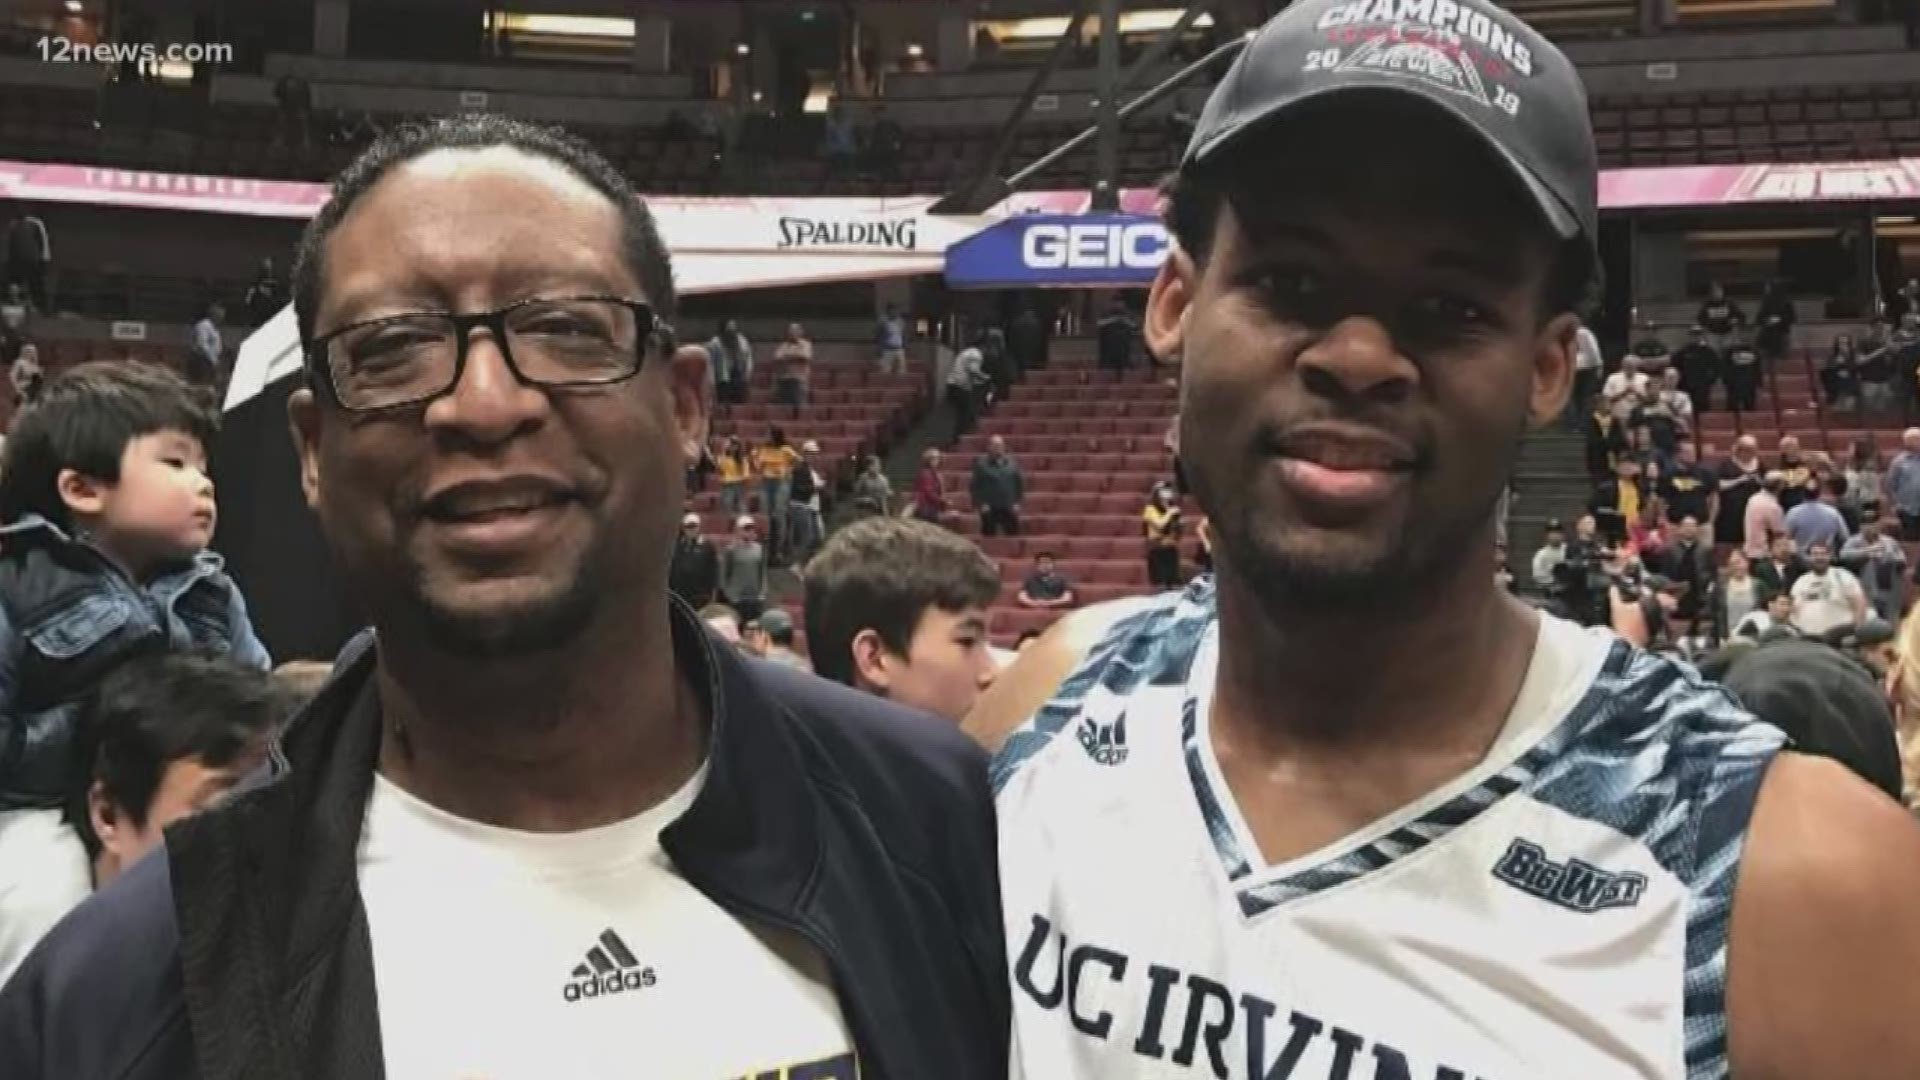 12 News director Elston Jones knows how nerve-wracking it can be to have a kid play in the NCAA basketball tournament. His son, Elston Jones Jr., is playing for UC Irvine, and they're hoping the team makes it all the way!